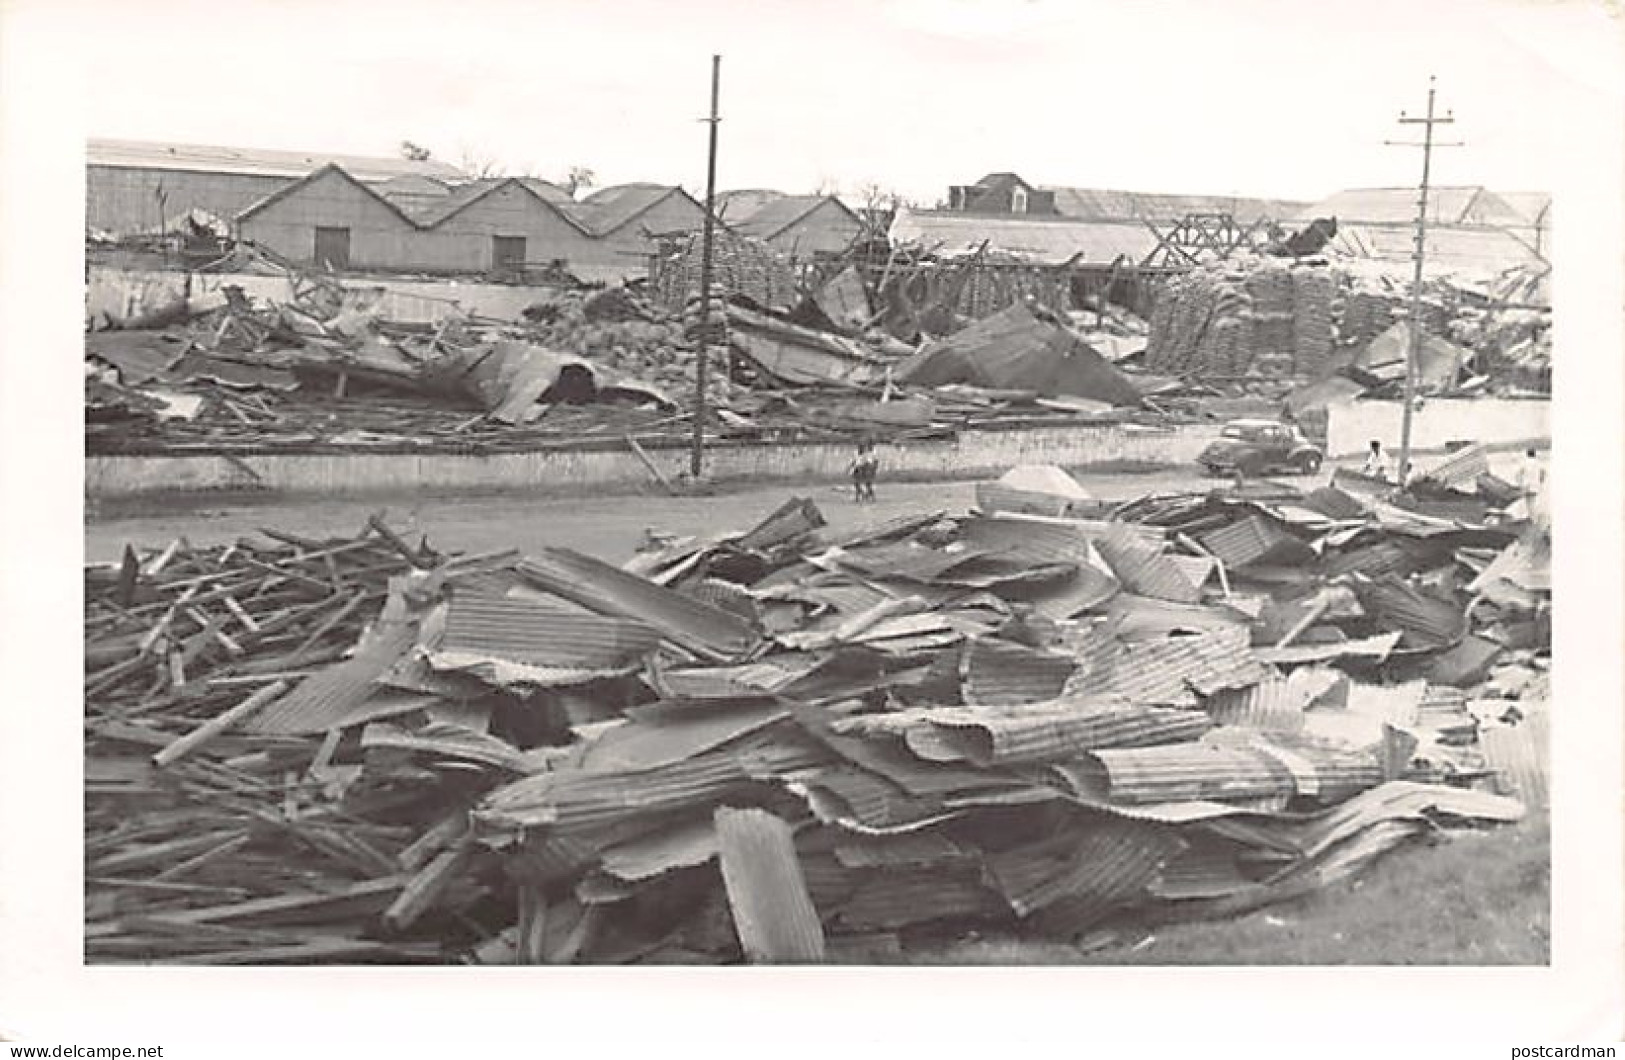 Mauritius - PORT-LOUIS - Mauritius Dock After The Cyclone - Year 1960 - Real Photo - Publ. Unknown  - Maurice